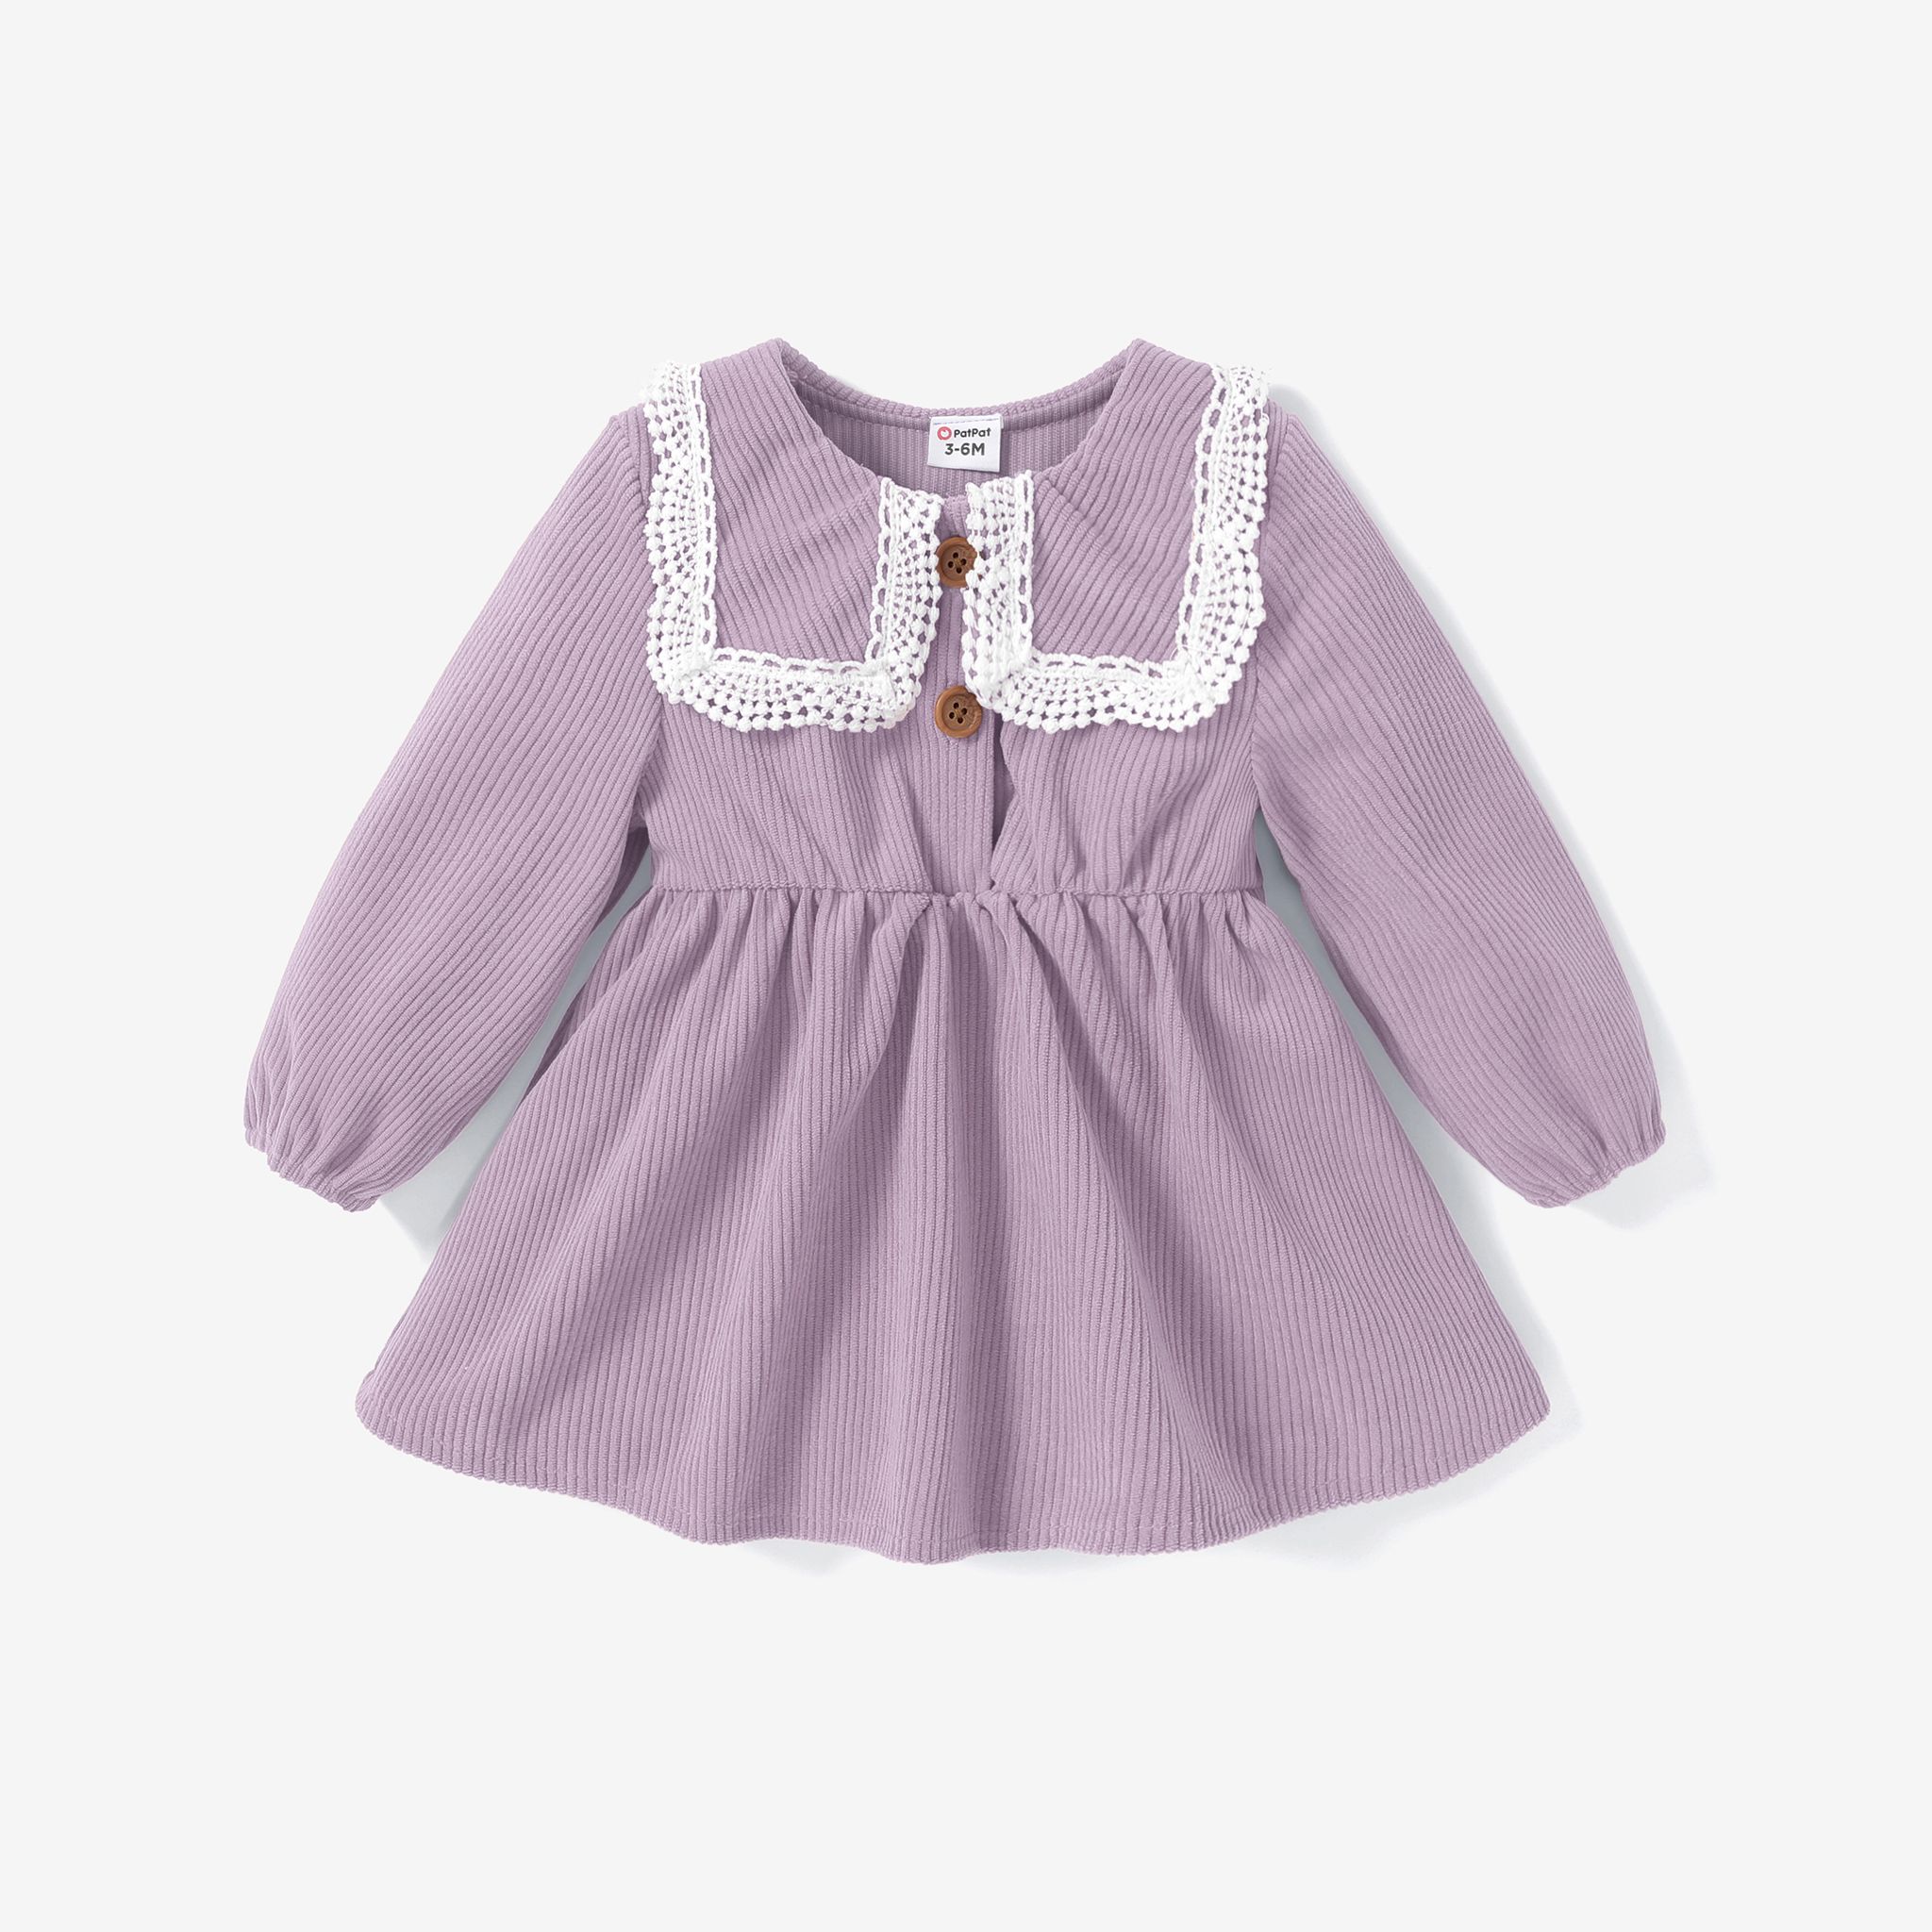 Baby Girls Solid Color Dress with Exquisite lace collar